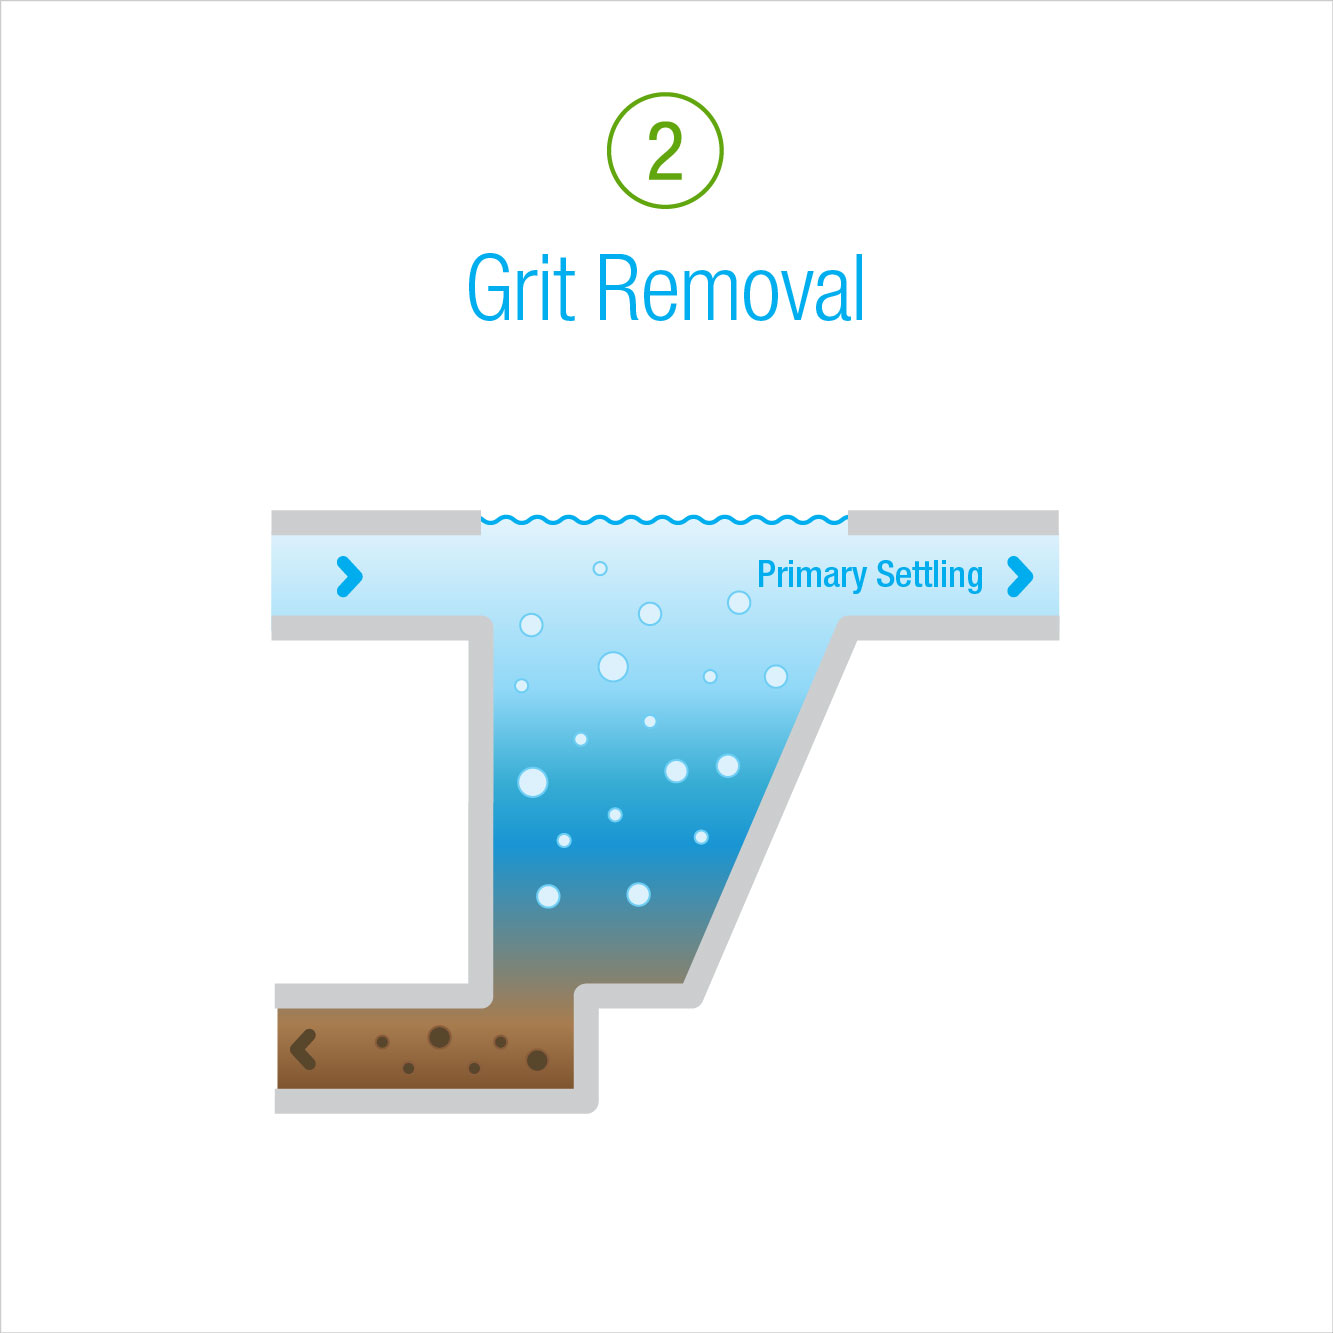 2: Grit Removal